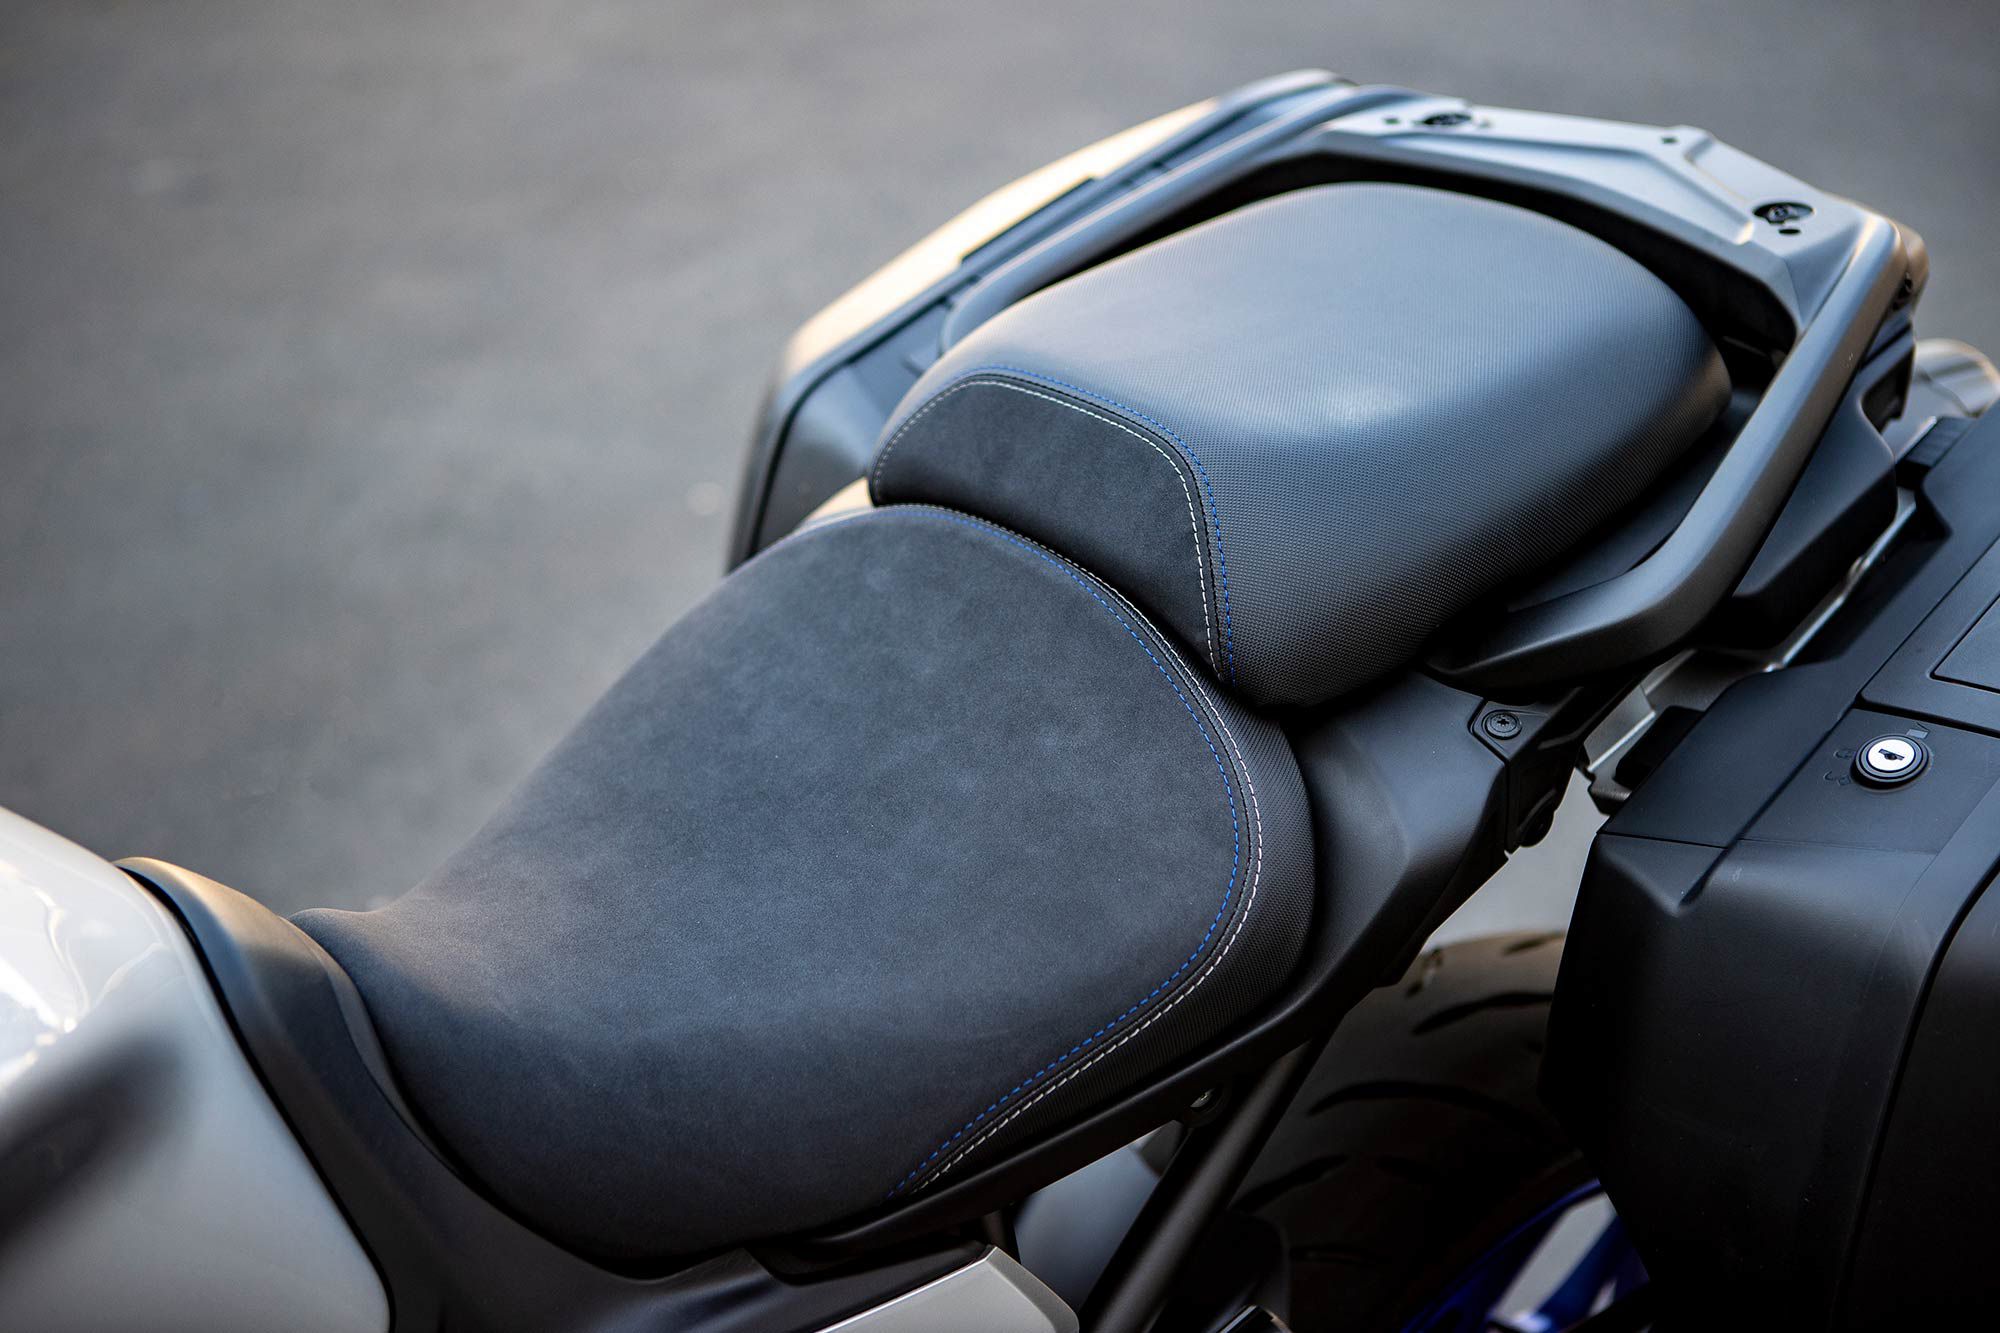 One of the many adjustable points on the Tracer 9 GT is its two-position seat. Standard seat height is a relatively low 31.9 inches, but it can easily be raised to 32.5 inches without any tools required.